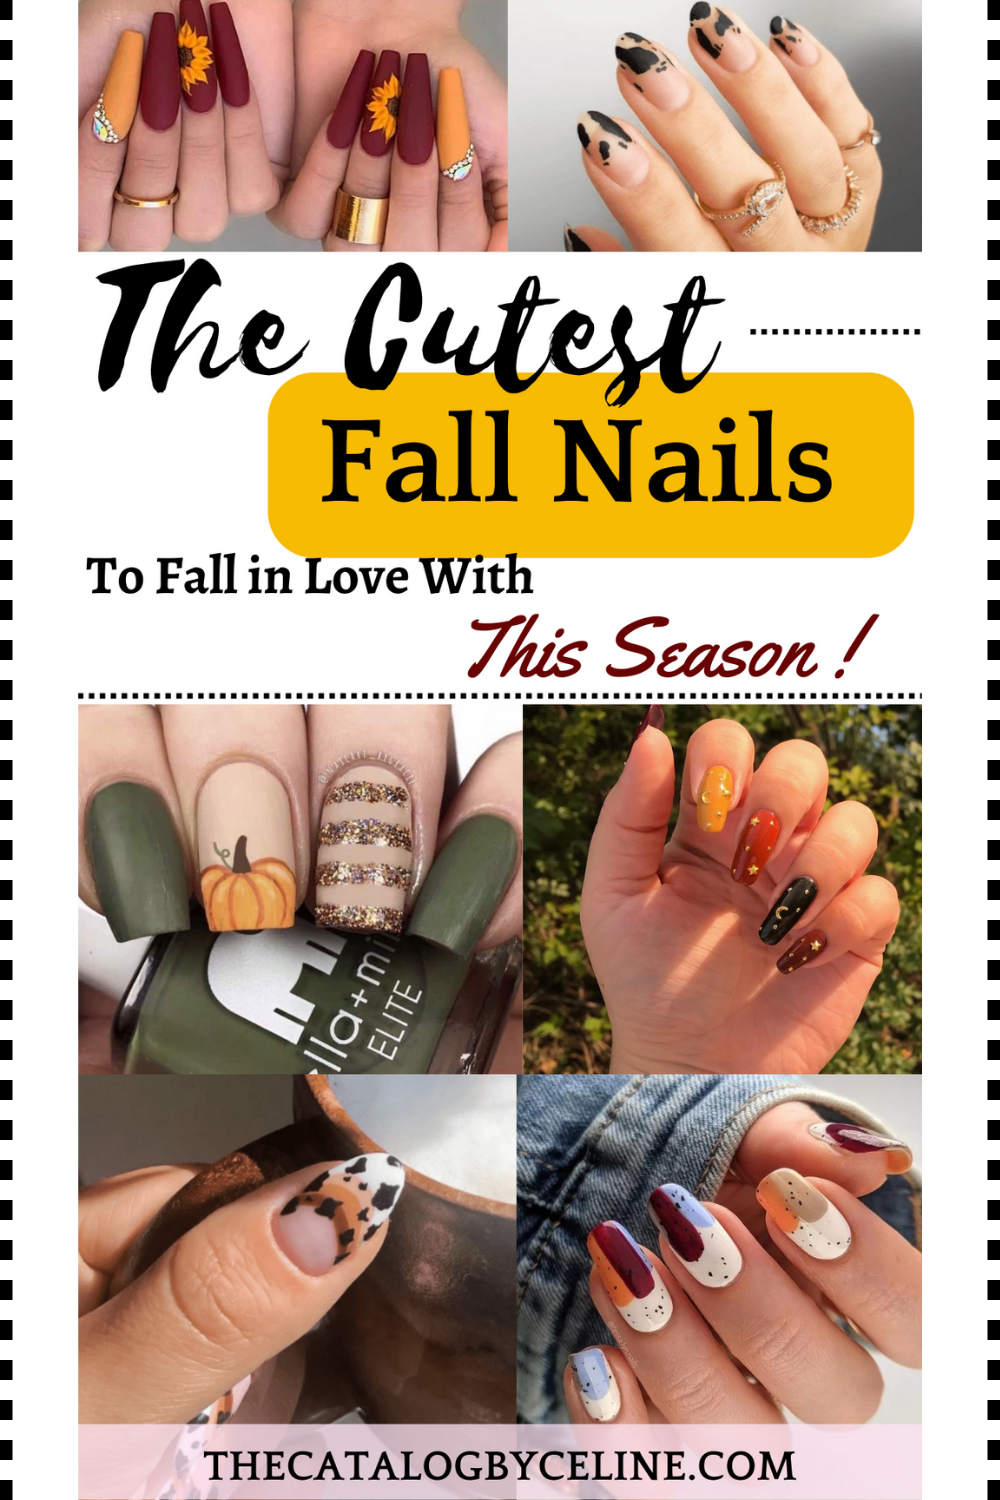 The Cutest Fall Nails to Fall in Love With This Season